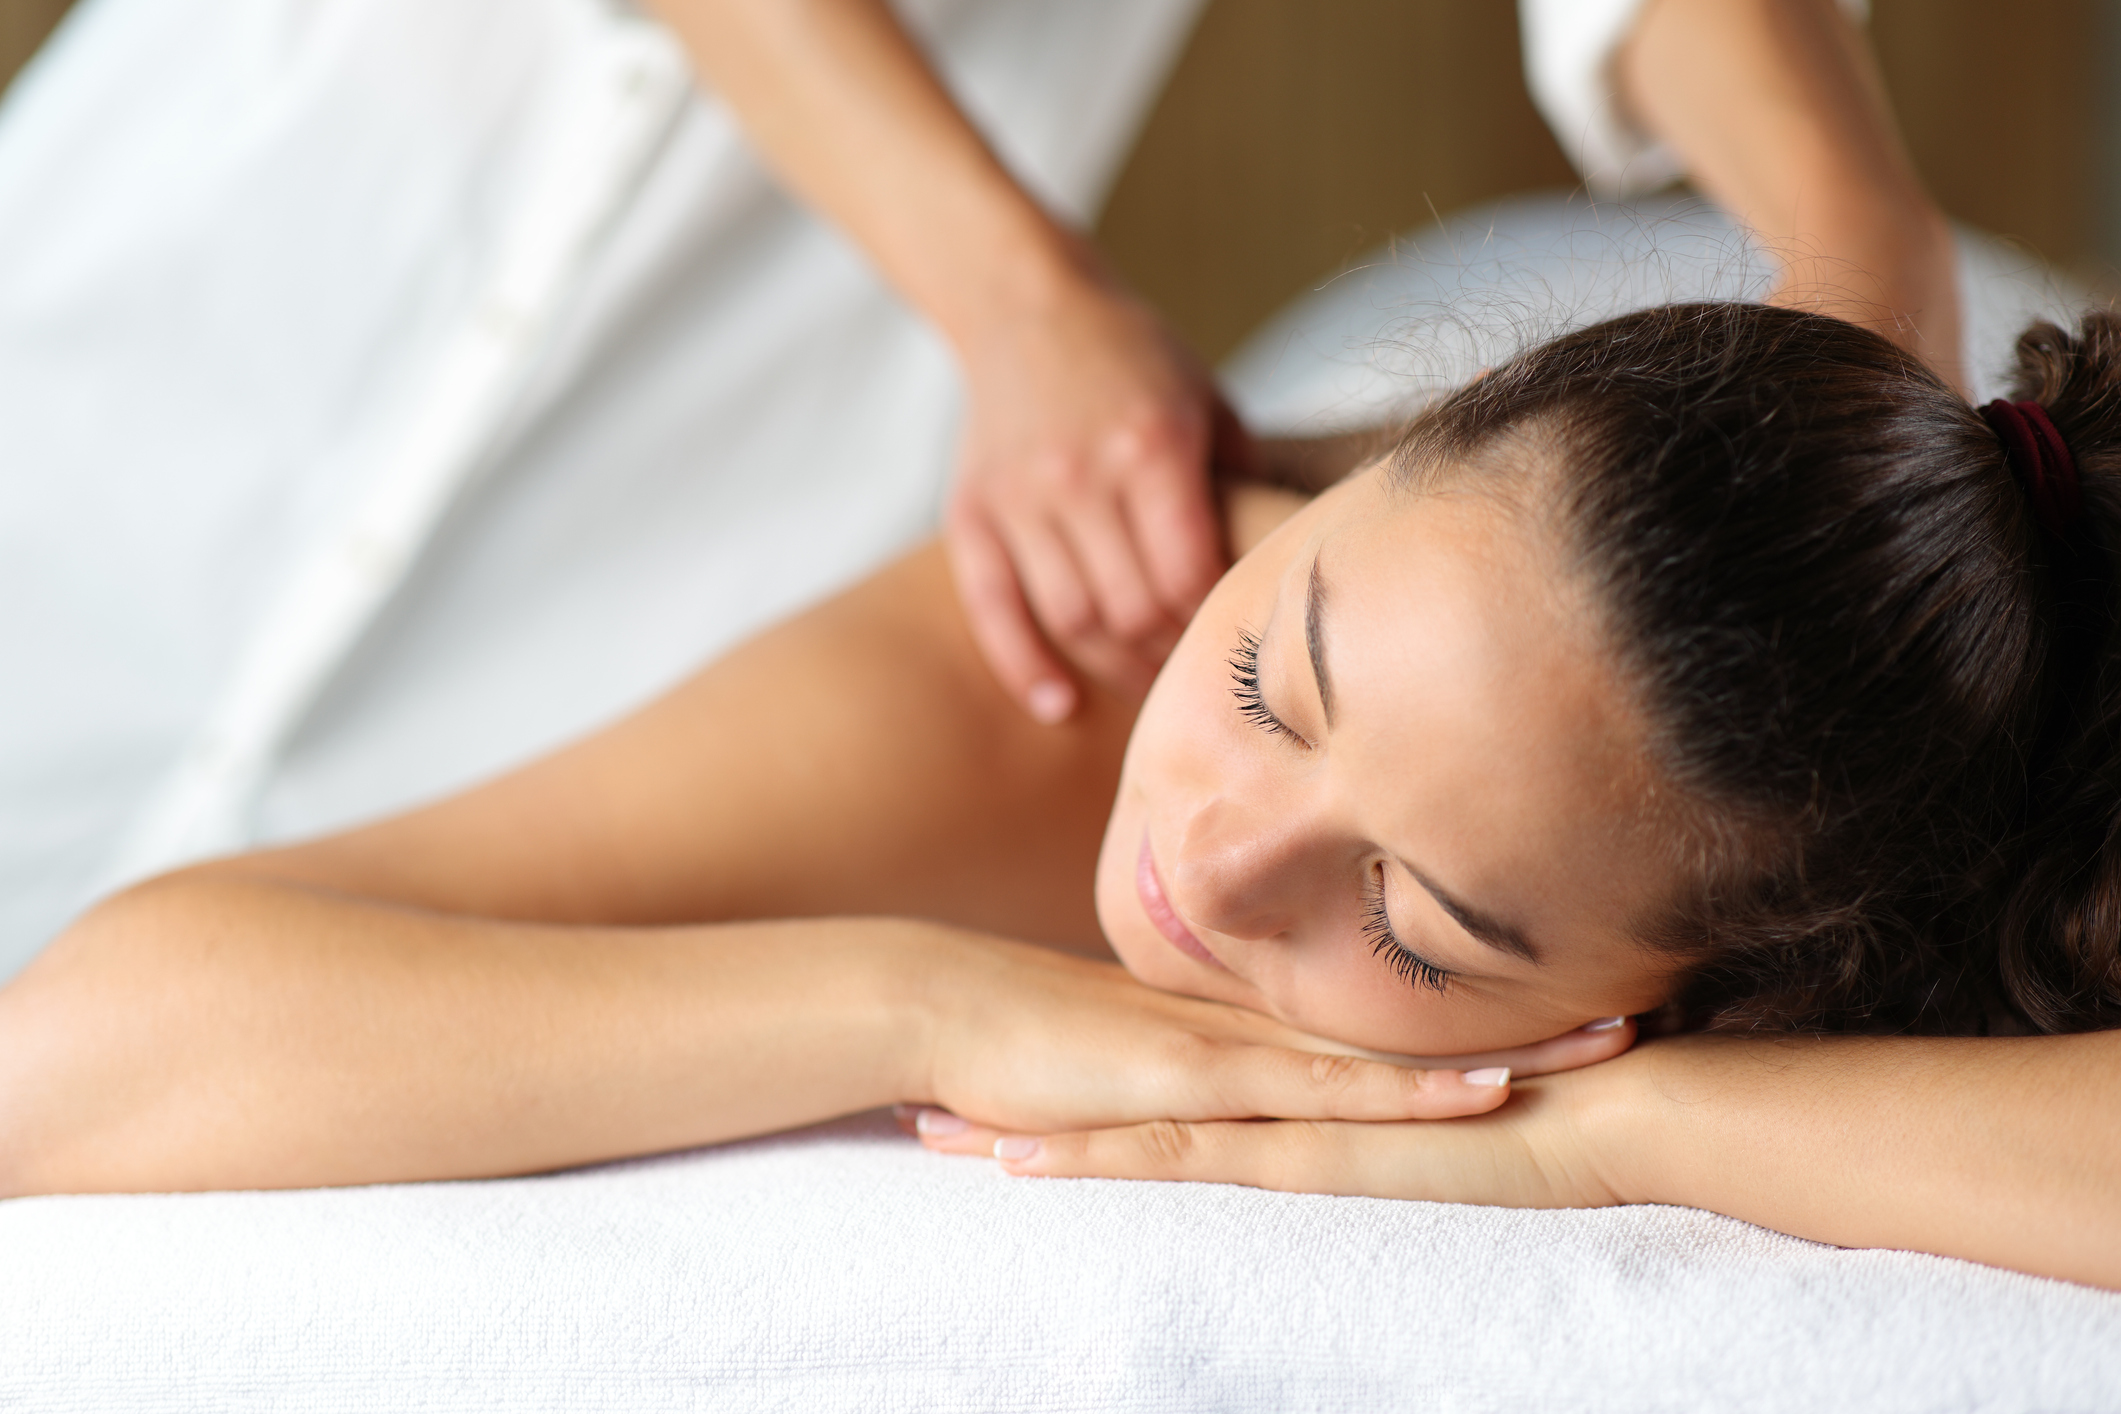 Enjoy a Blissful Massage at the Top Flower Mound Massage Therapy Spa